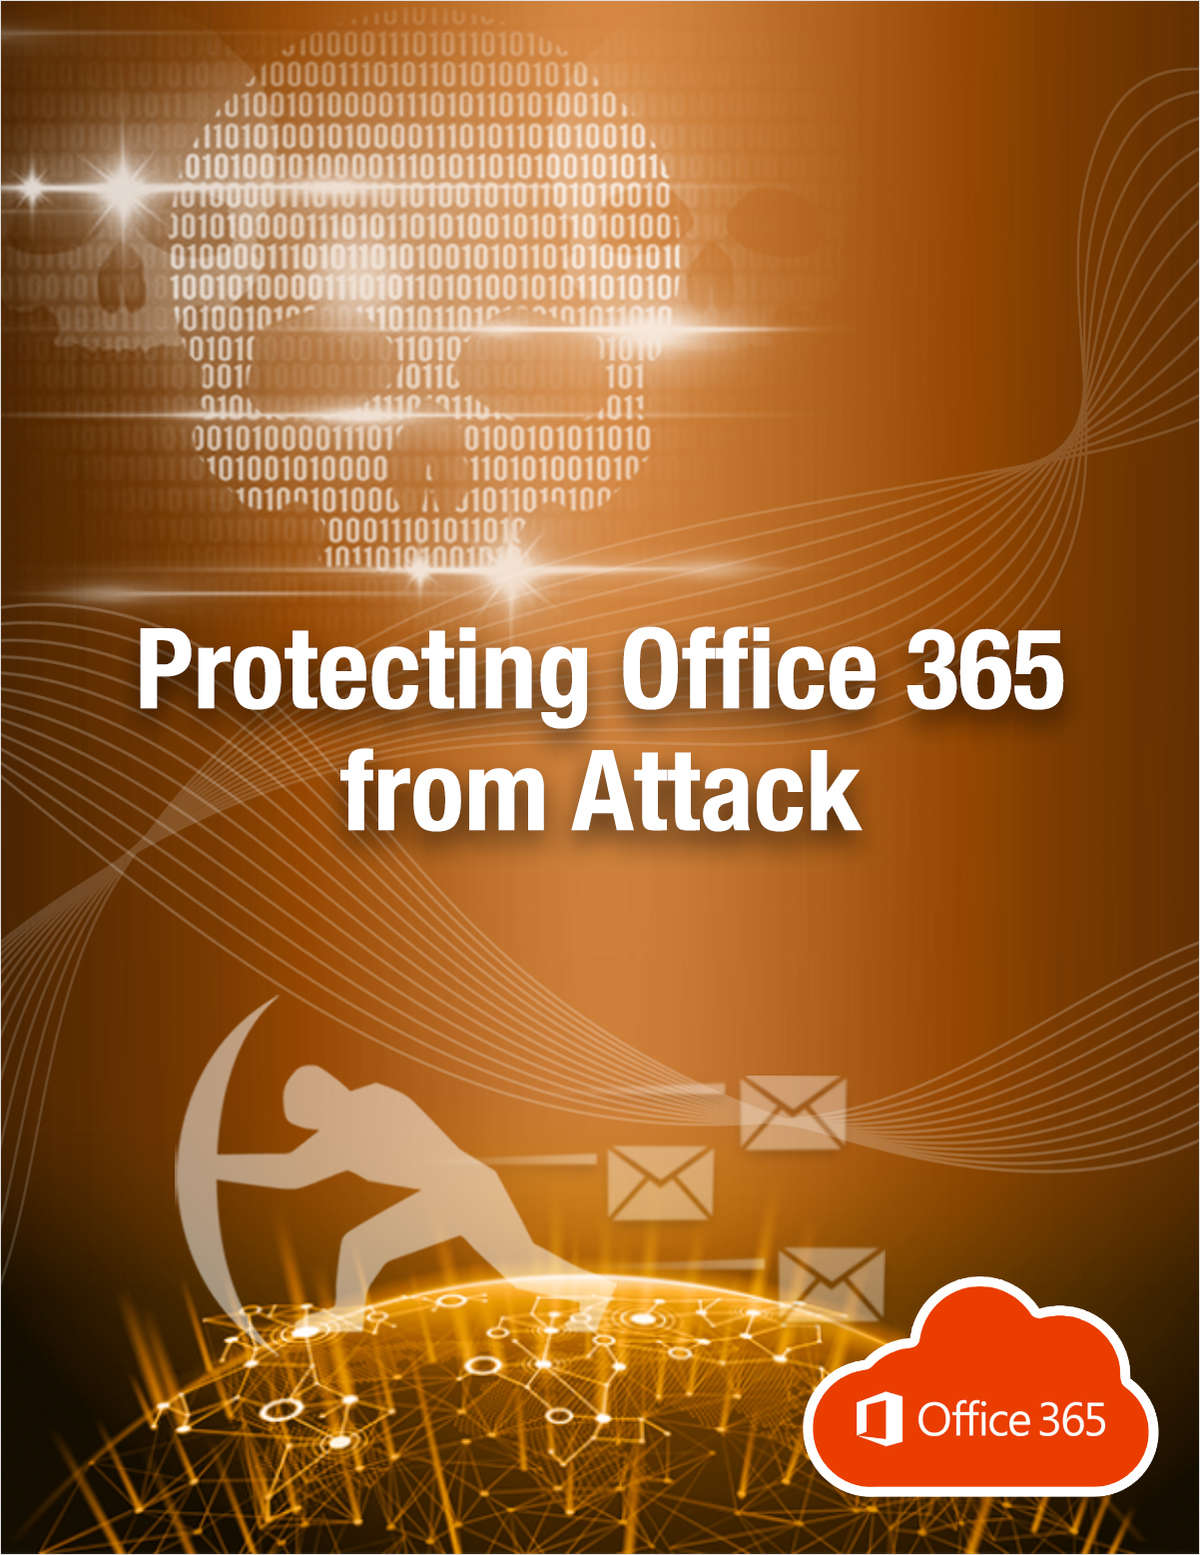 Guide to Protecting Office 365 from Attack